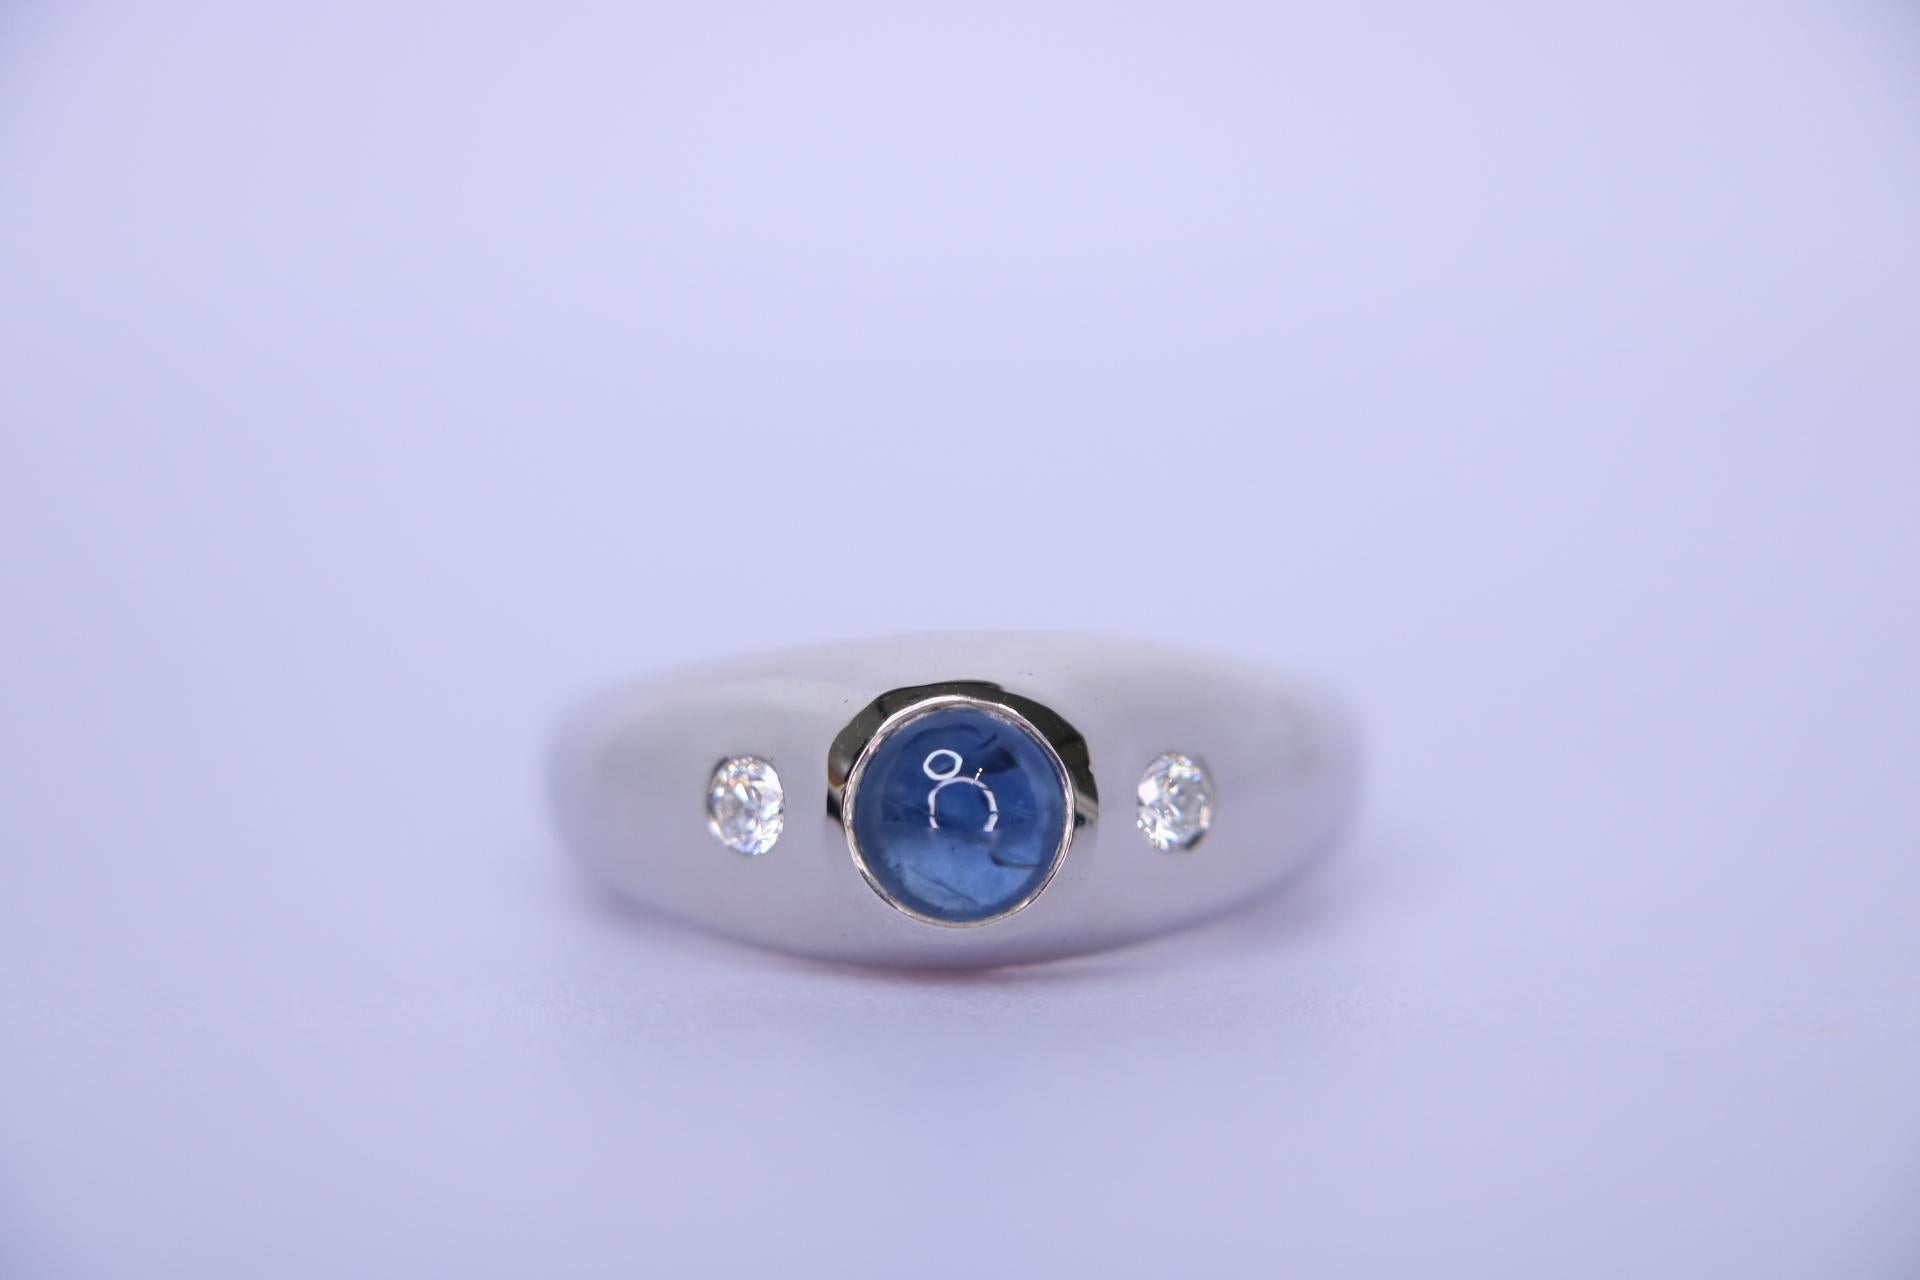 Orloff of Denmark; 925 Sterling Silver Ring set with a 1.07 carat Natural Blue Sapphire and two Natural White Diamonds.

This sterling silver ring features a 1 carat cabochon sapphire, known for its deep blue color, which has been heat-treated to